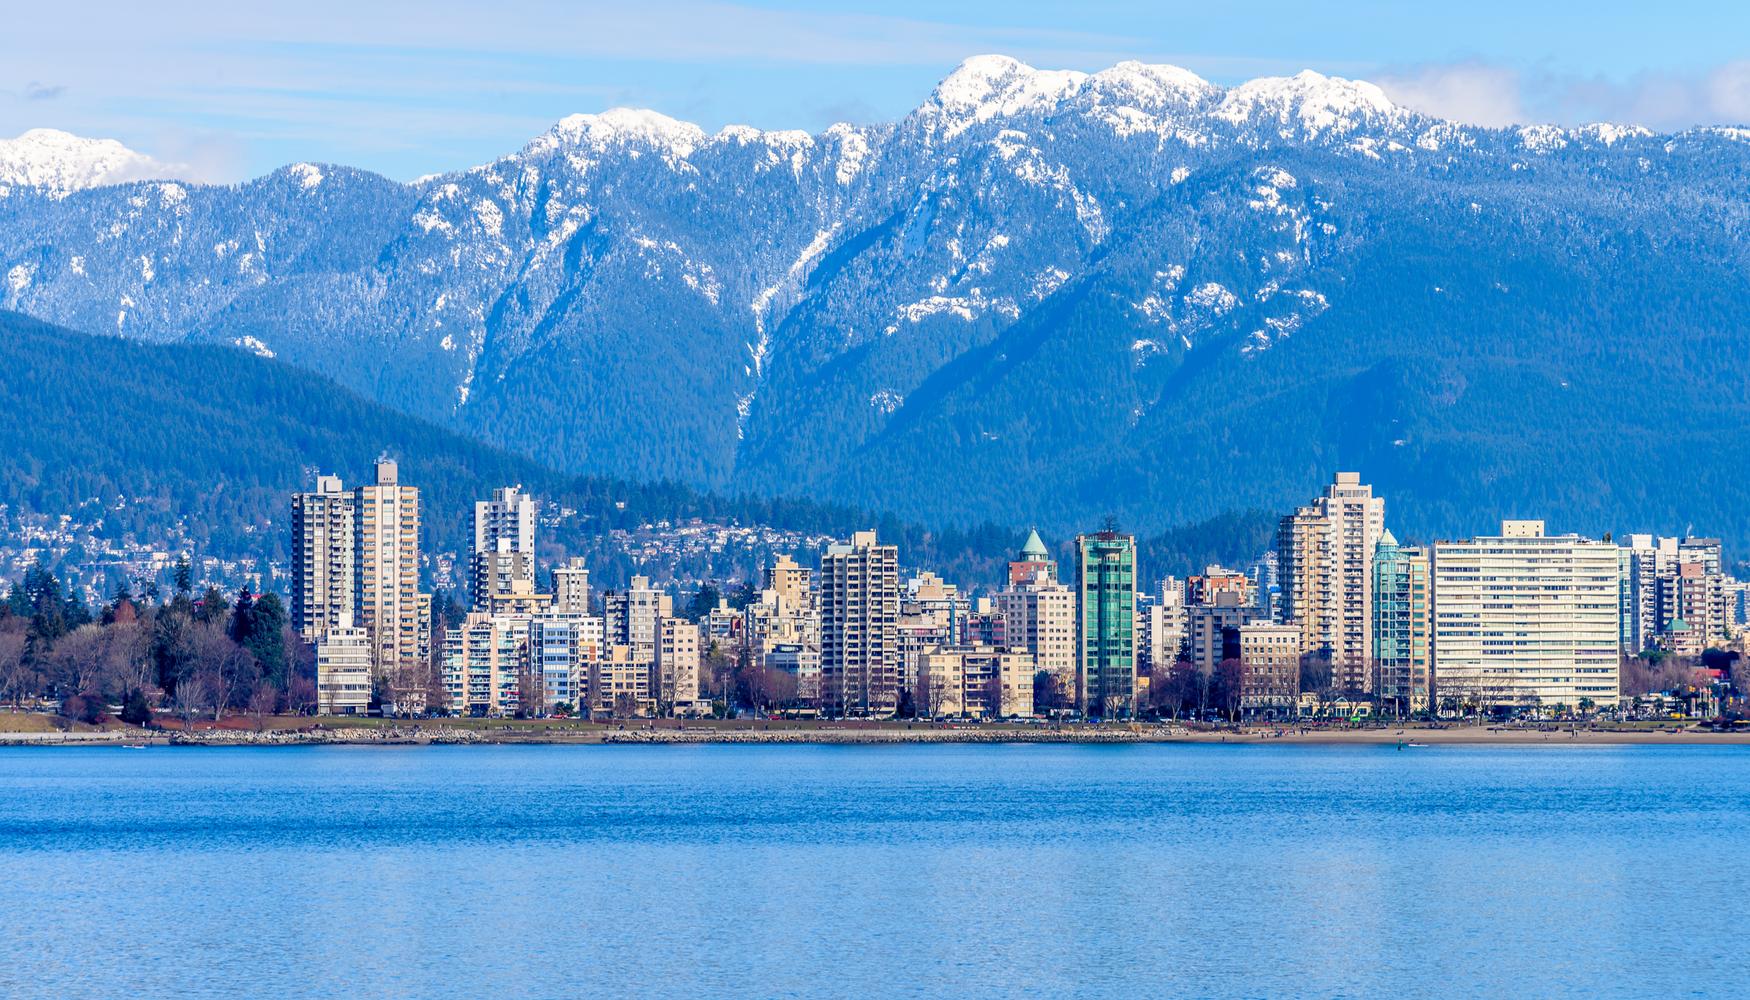 vancouver travel guide free